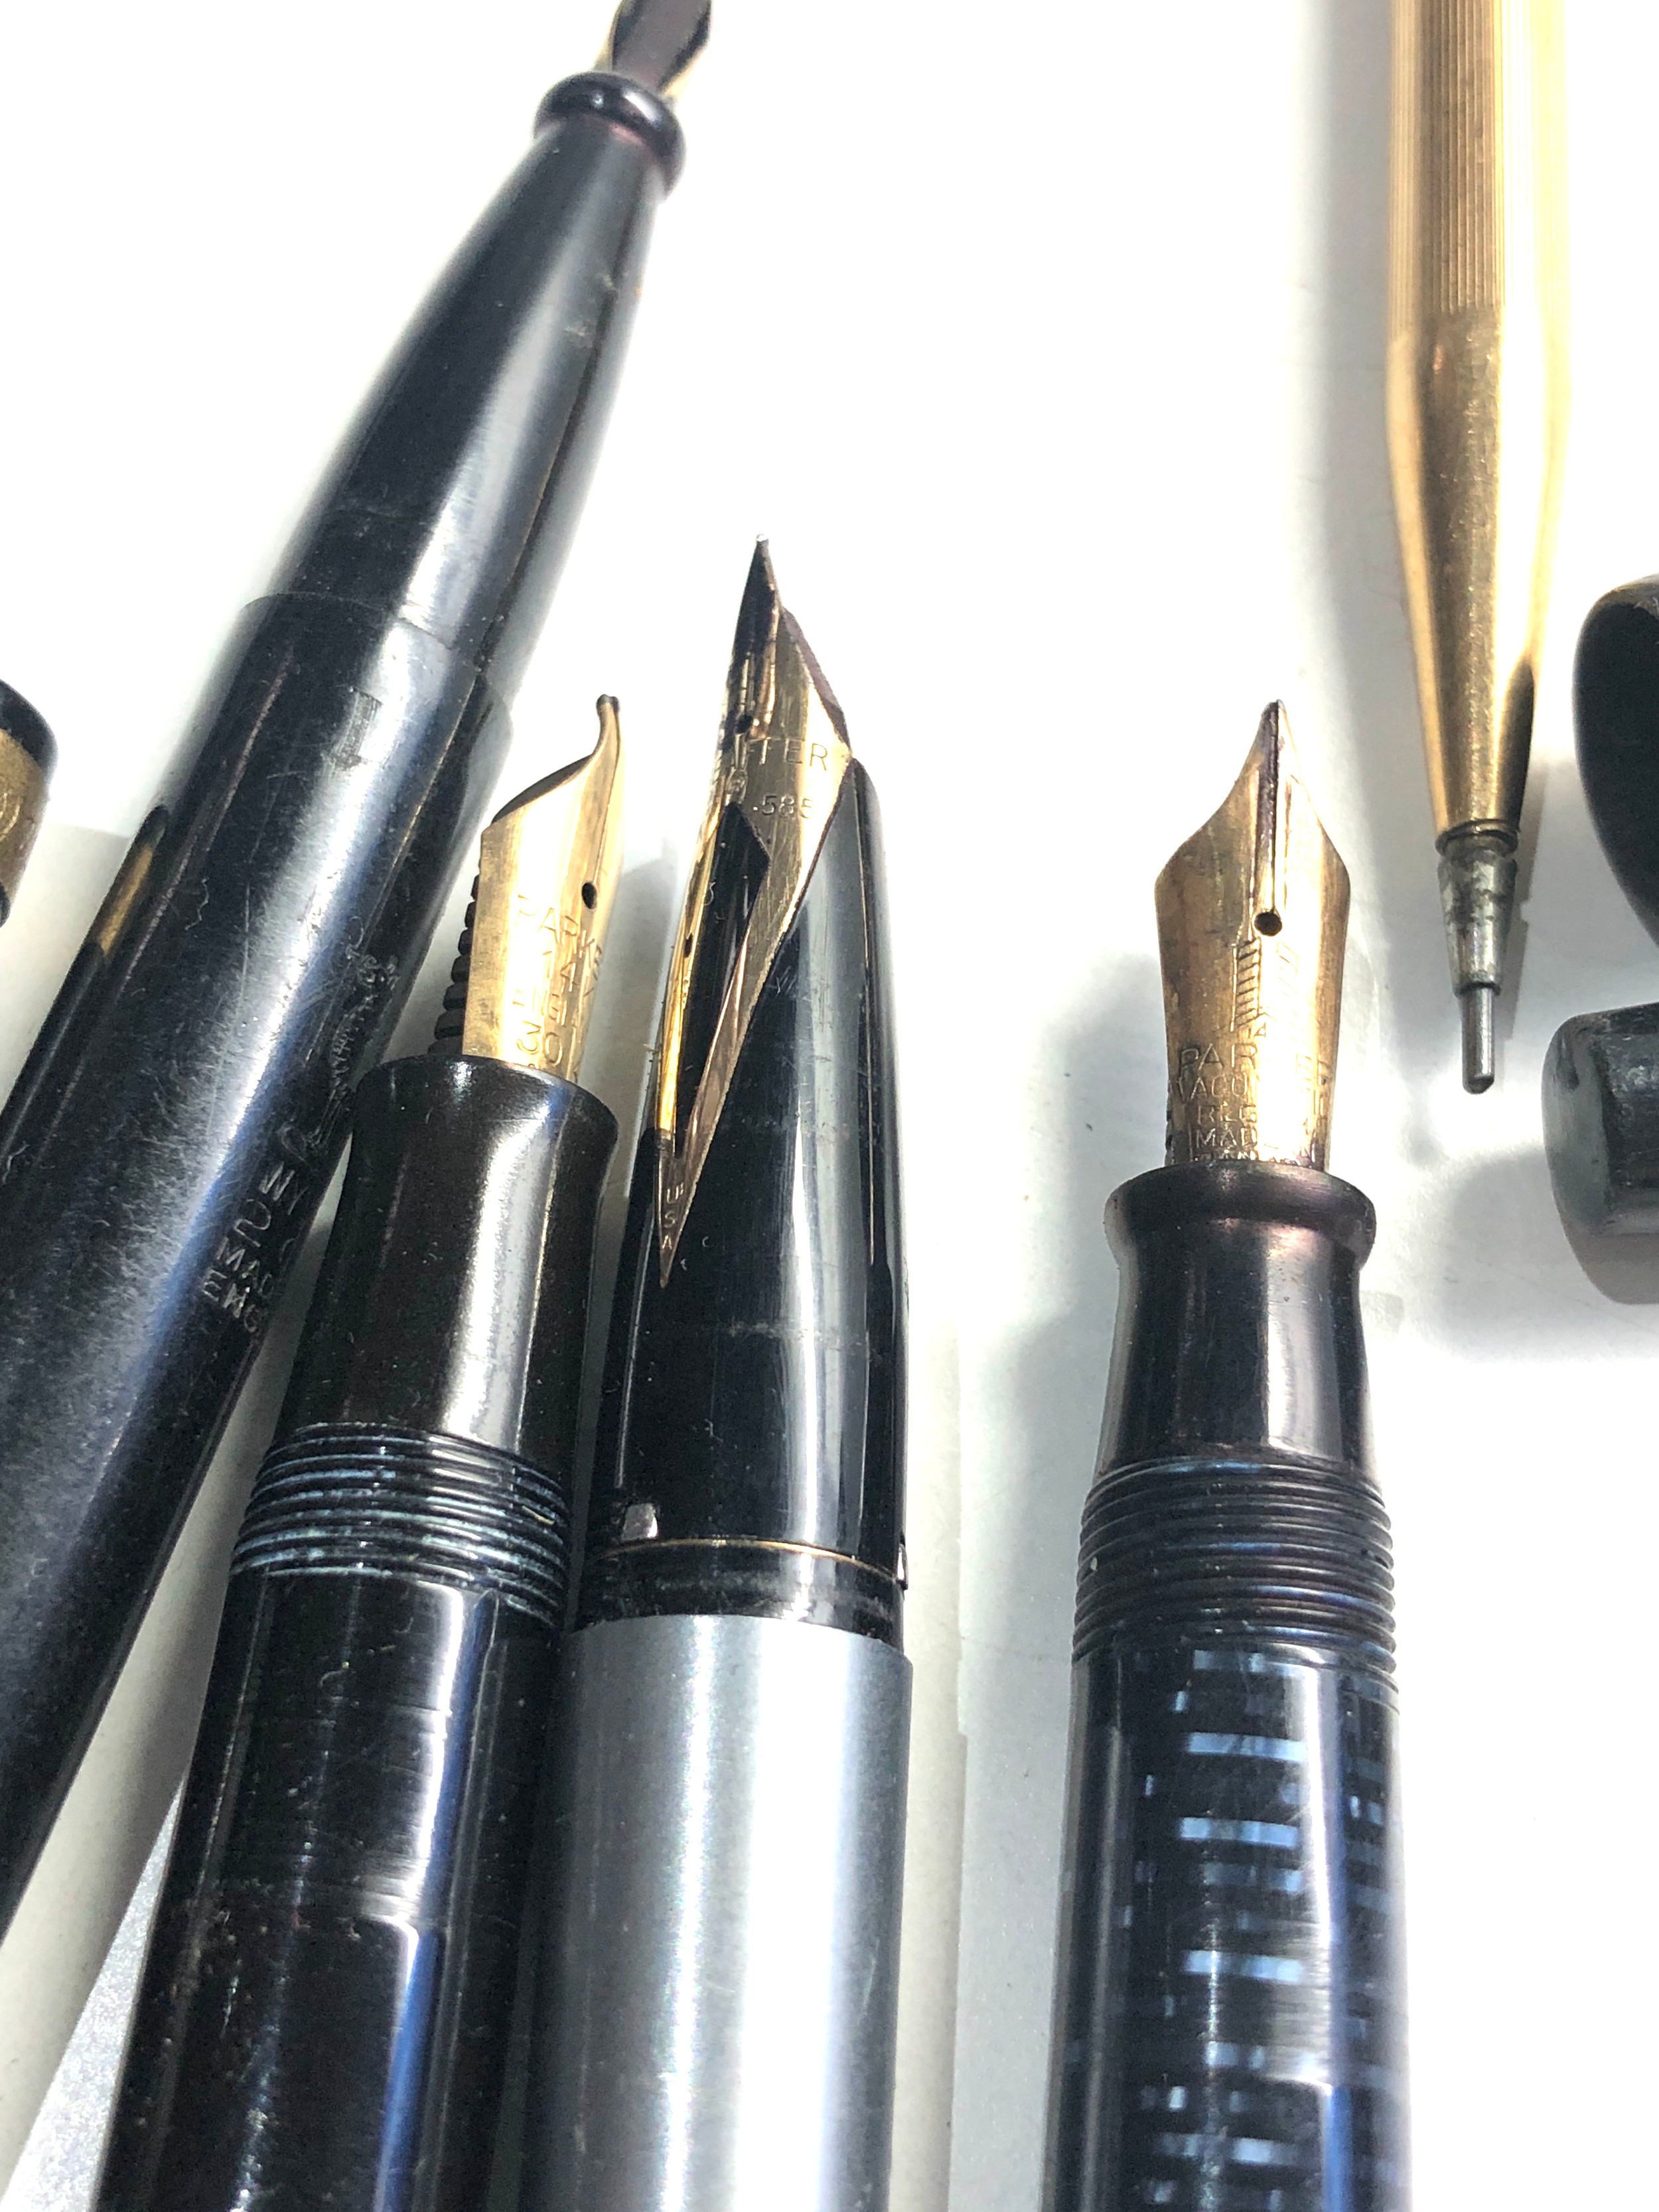 Selection of Vintage fountain pens includes 14ct gold nib parkers sheaffer wyvern etc - Image 4 of 5